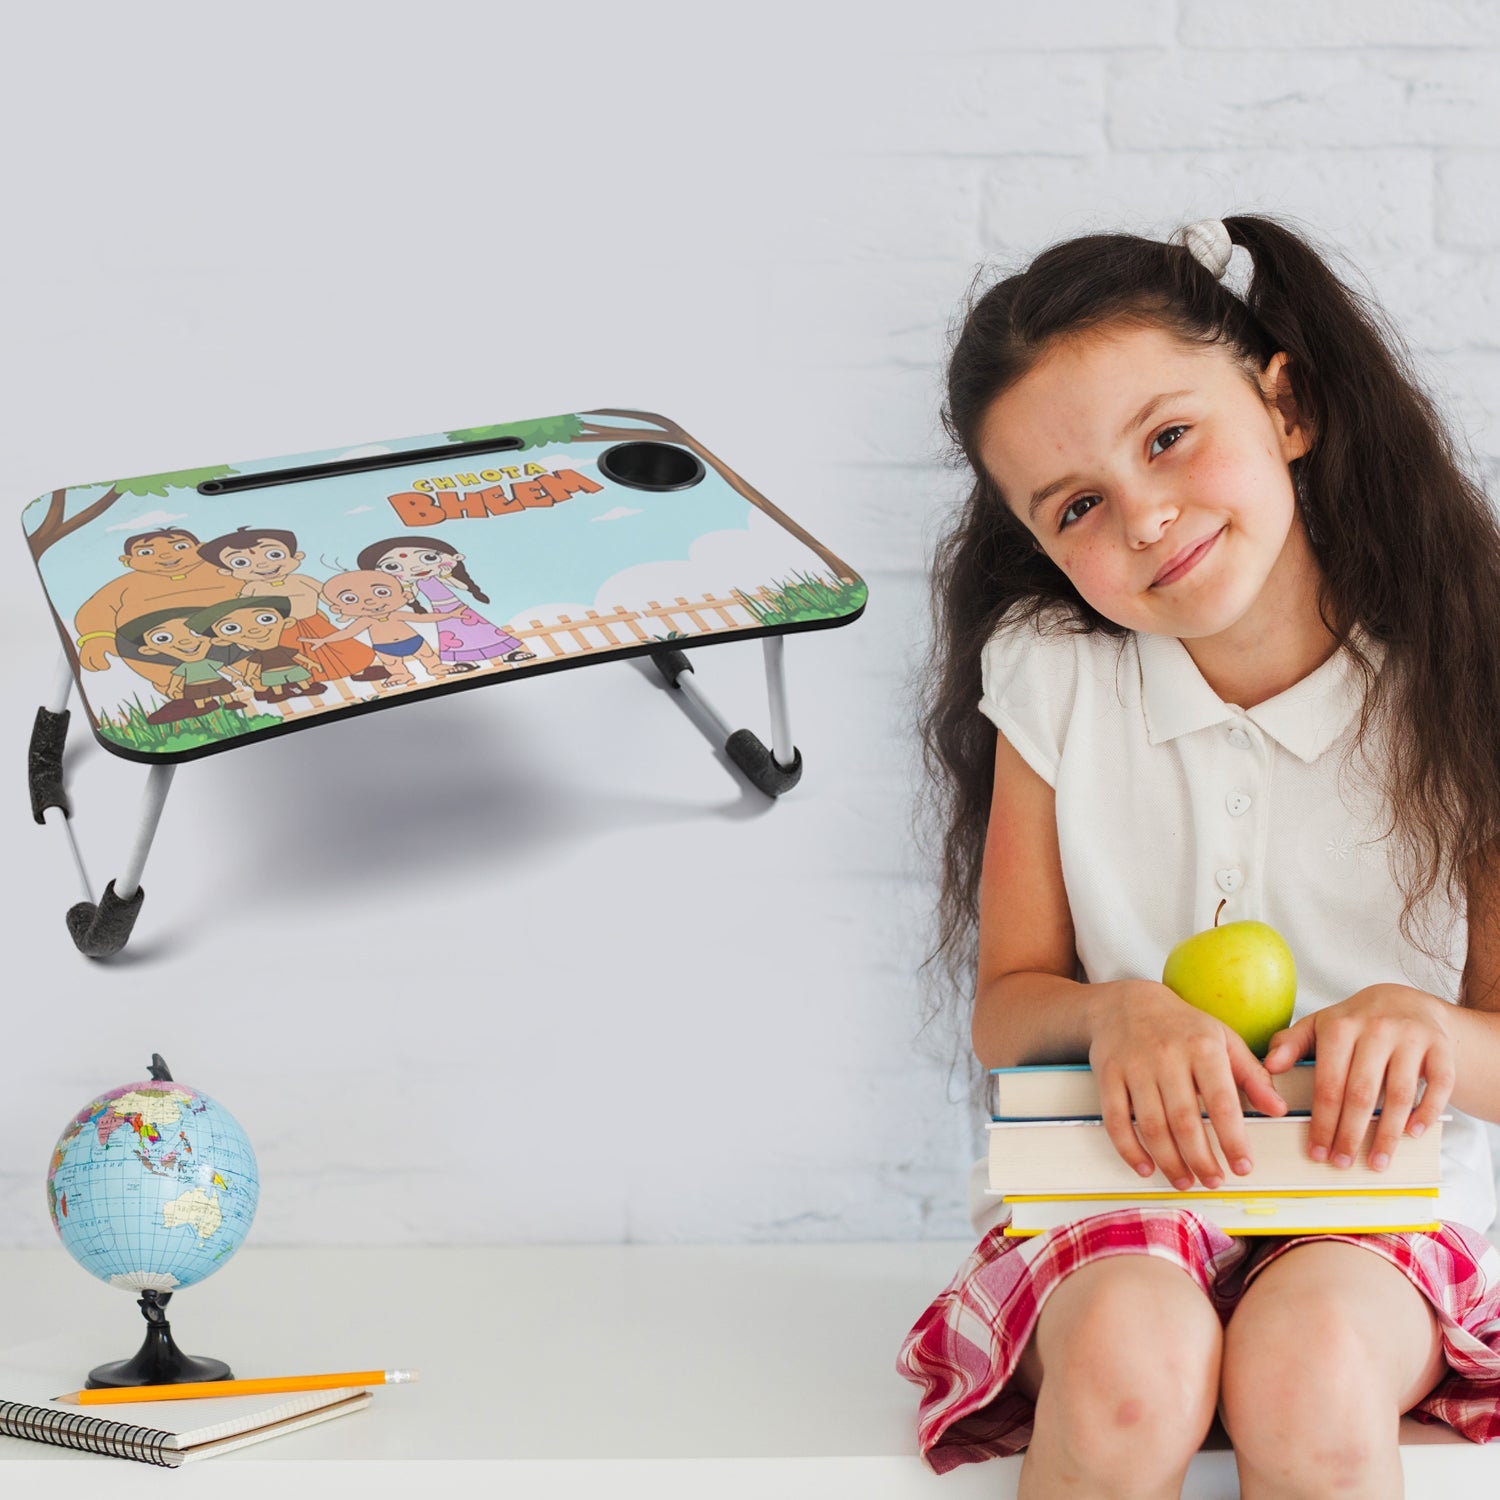 7696 Chhota Bheem Design Foldable Bed Study Table Portable Multifunction Laptop Table Lapdesk for Children Bed Foldable Table Work Office Home with Tablet Slot & Cup Holder DeoDap